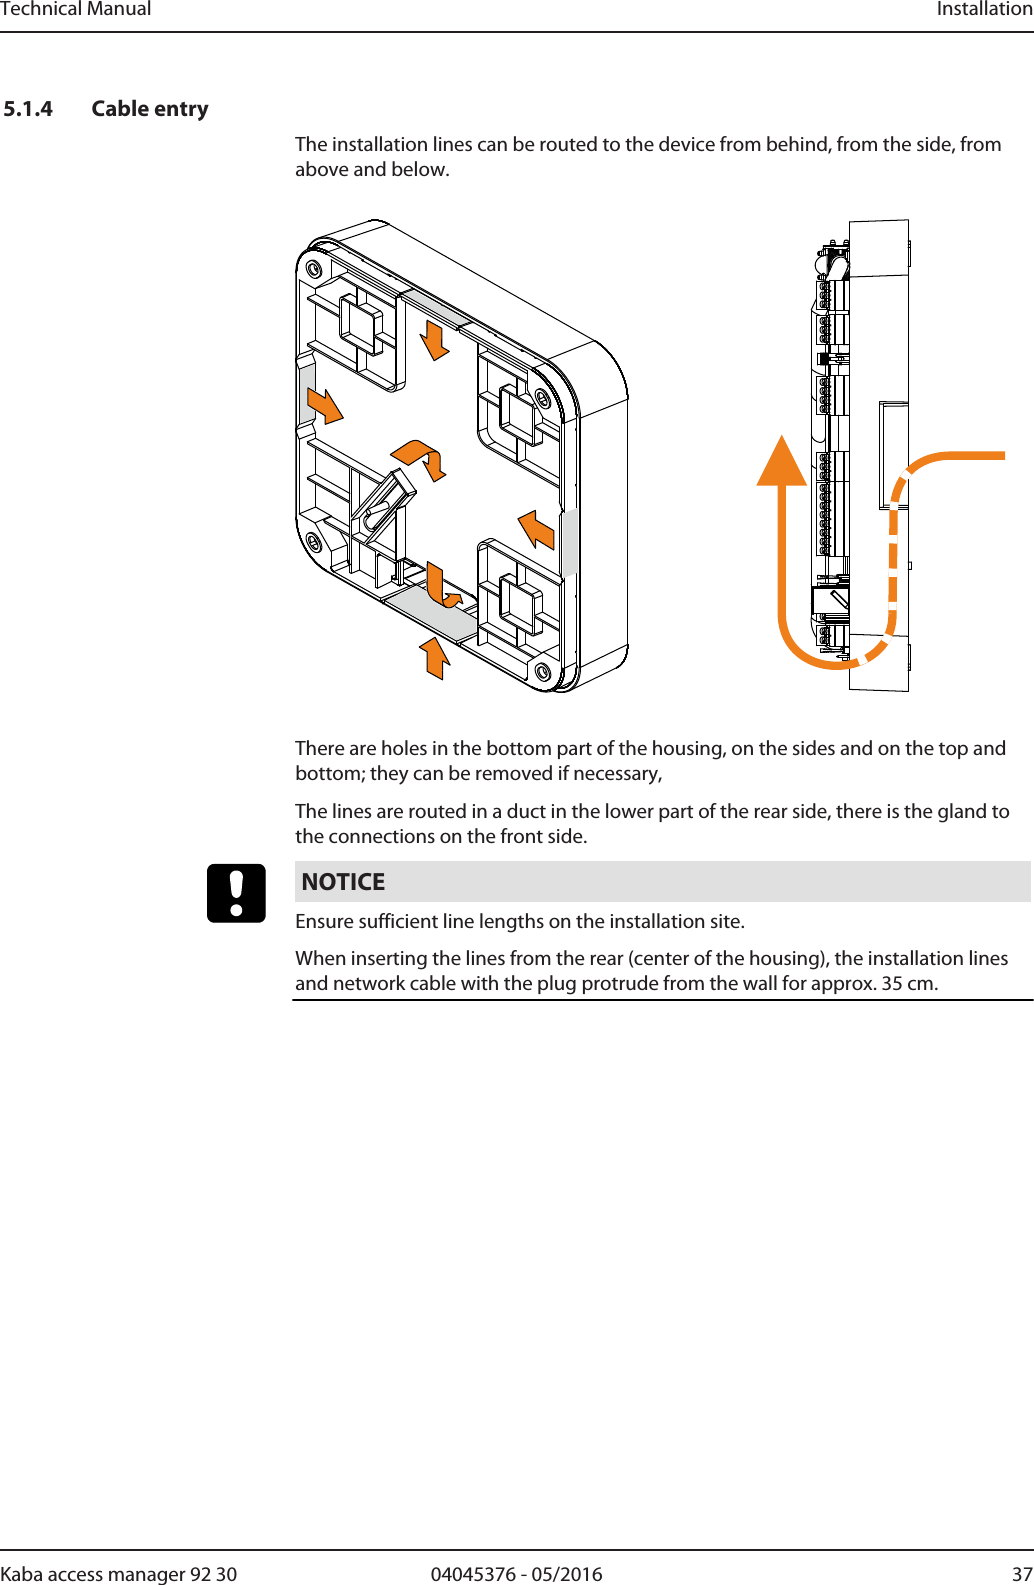 Technical Manual Installation3704045376 - 05/2016Kaba access manager 92 305.1.4 Cable entryThe installation lines can be routed to the device from behind, from the side, fromabove and below.There are holes in the bottom part of the housing, on the sides and on the top andbottom; they can be removed if necessary,The lines are routed in a duct in the lower part of the rear side, there is the gland tothe connections on the front side.NOTICEEnsure sufficient line lengths on the installation site.When inserting the lines from the rear (center of the housing), the installation linesand network cable with the plug protrude from the wall for approx. 35 cm.